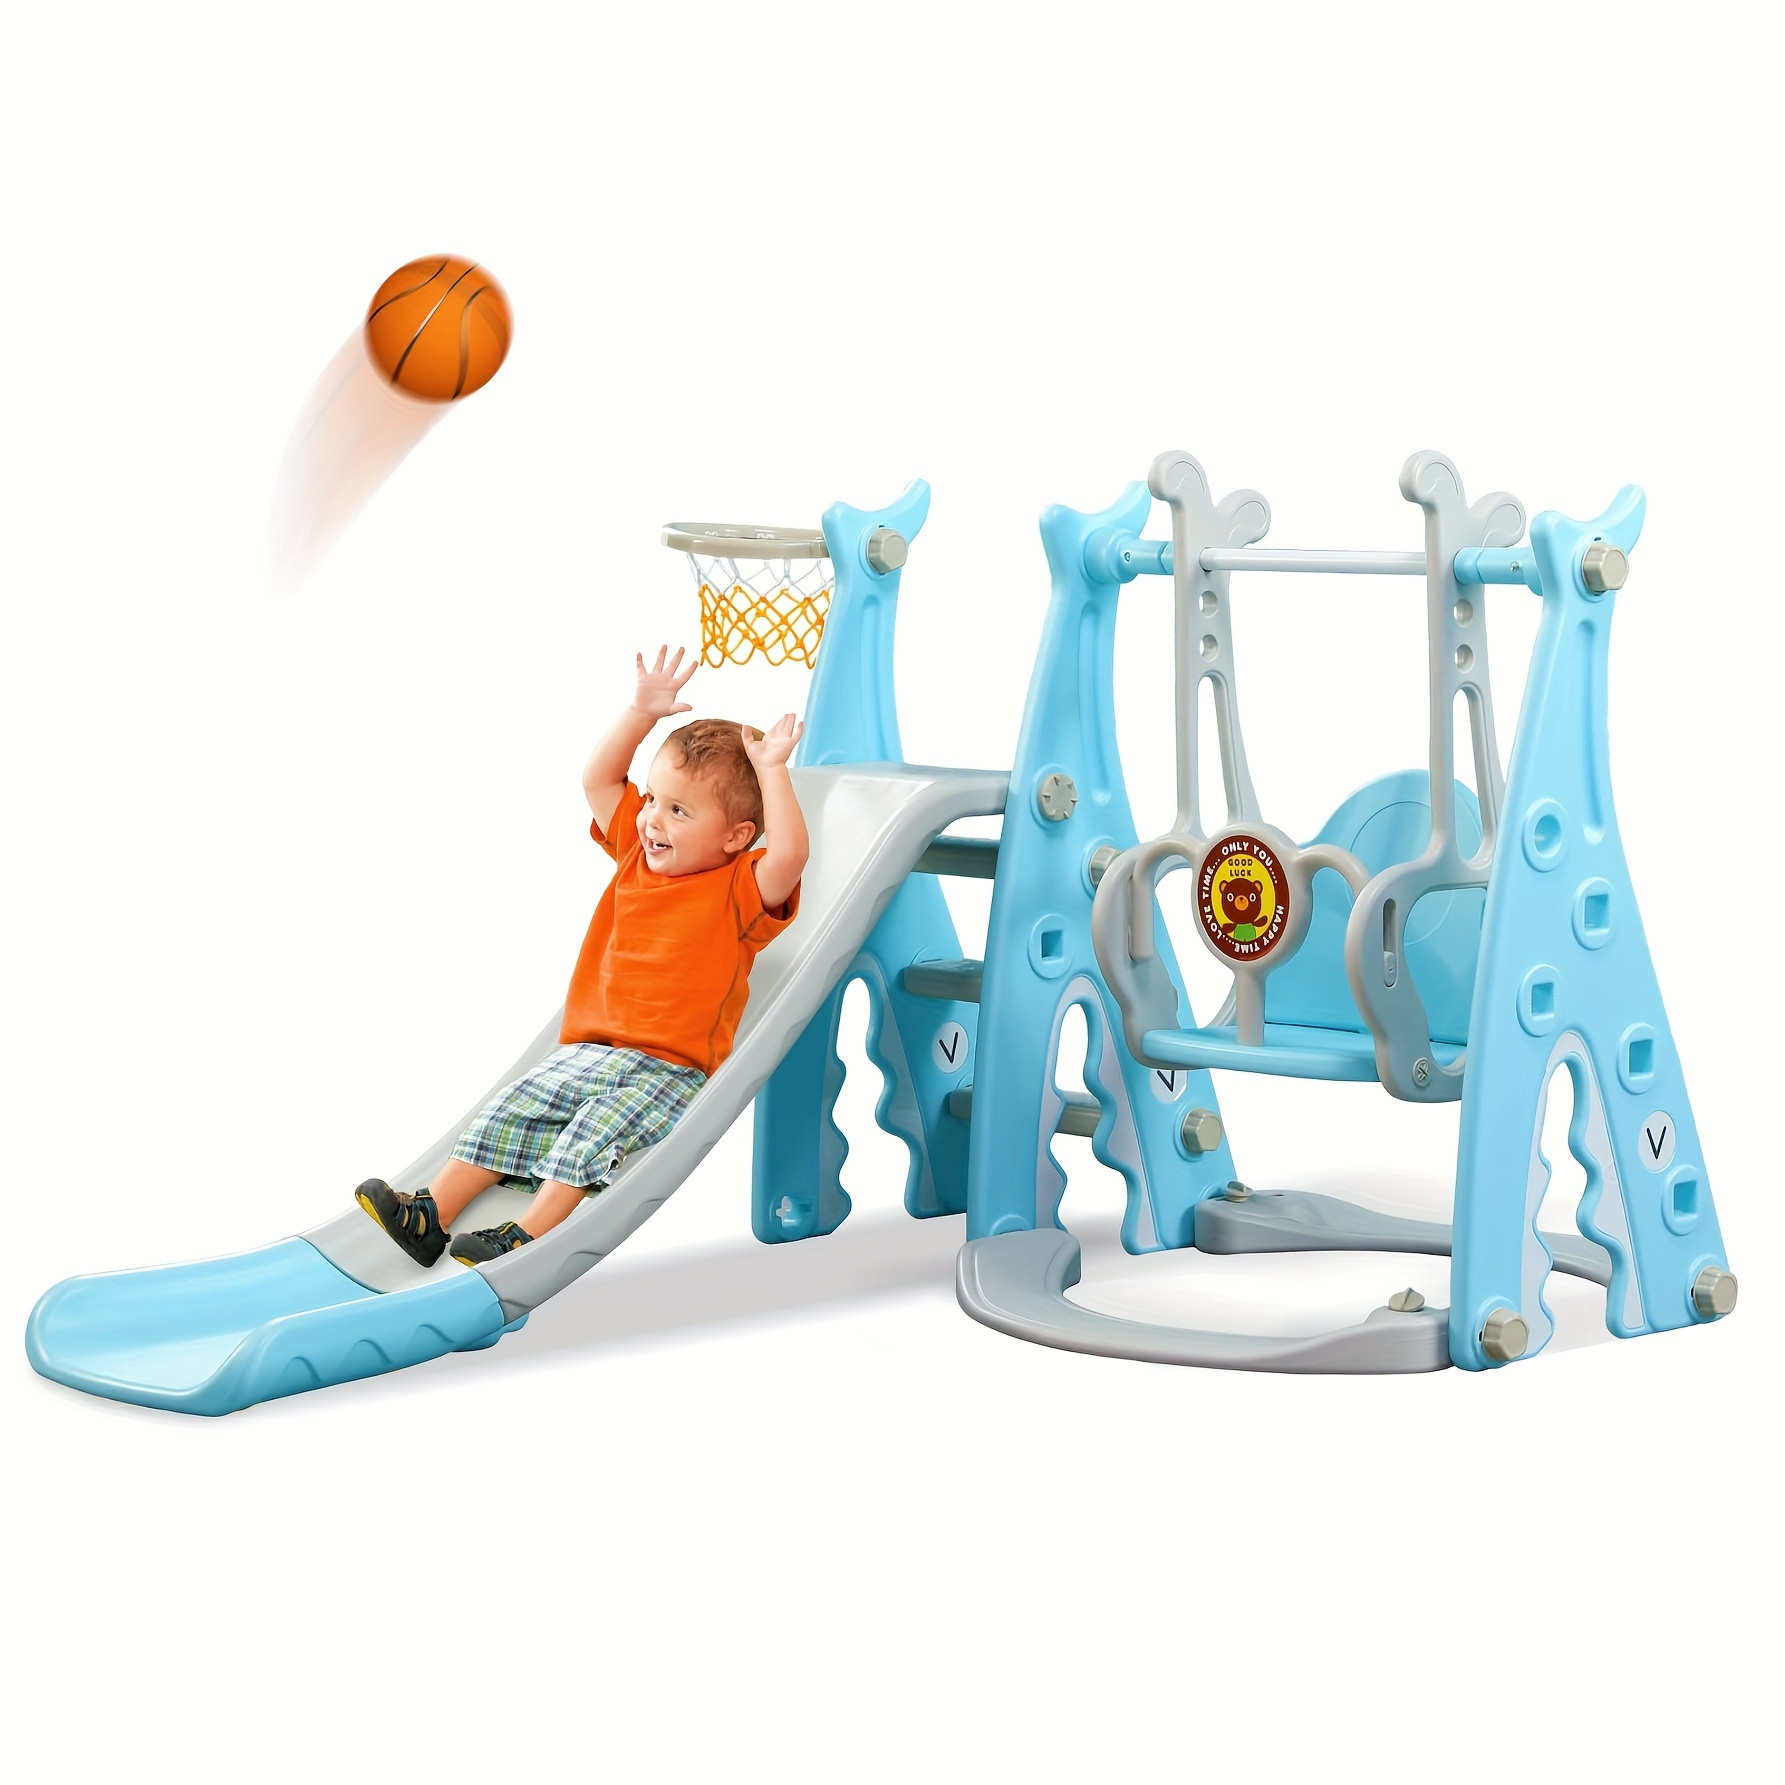 

Toddlers Slide And Swing Set 4 In 1 Kids Outdoor And Indoor Playhouse With Slide And Swing For Boys And Girls With Basketball Hoop, Extra Long Slide Easy Set Up Baby Playset